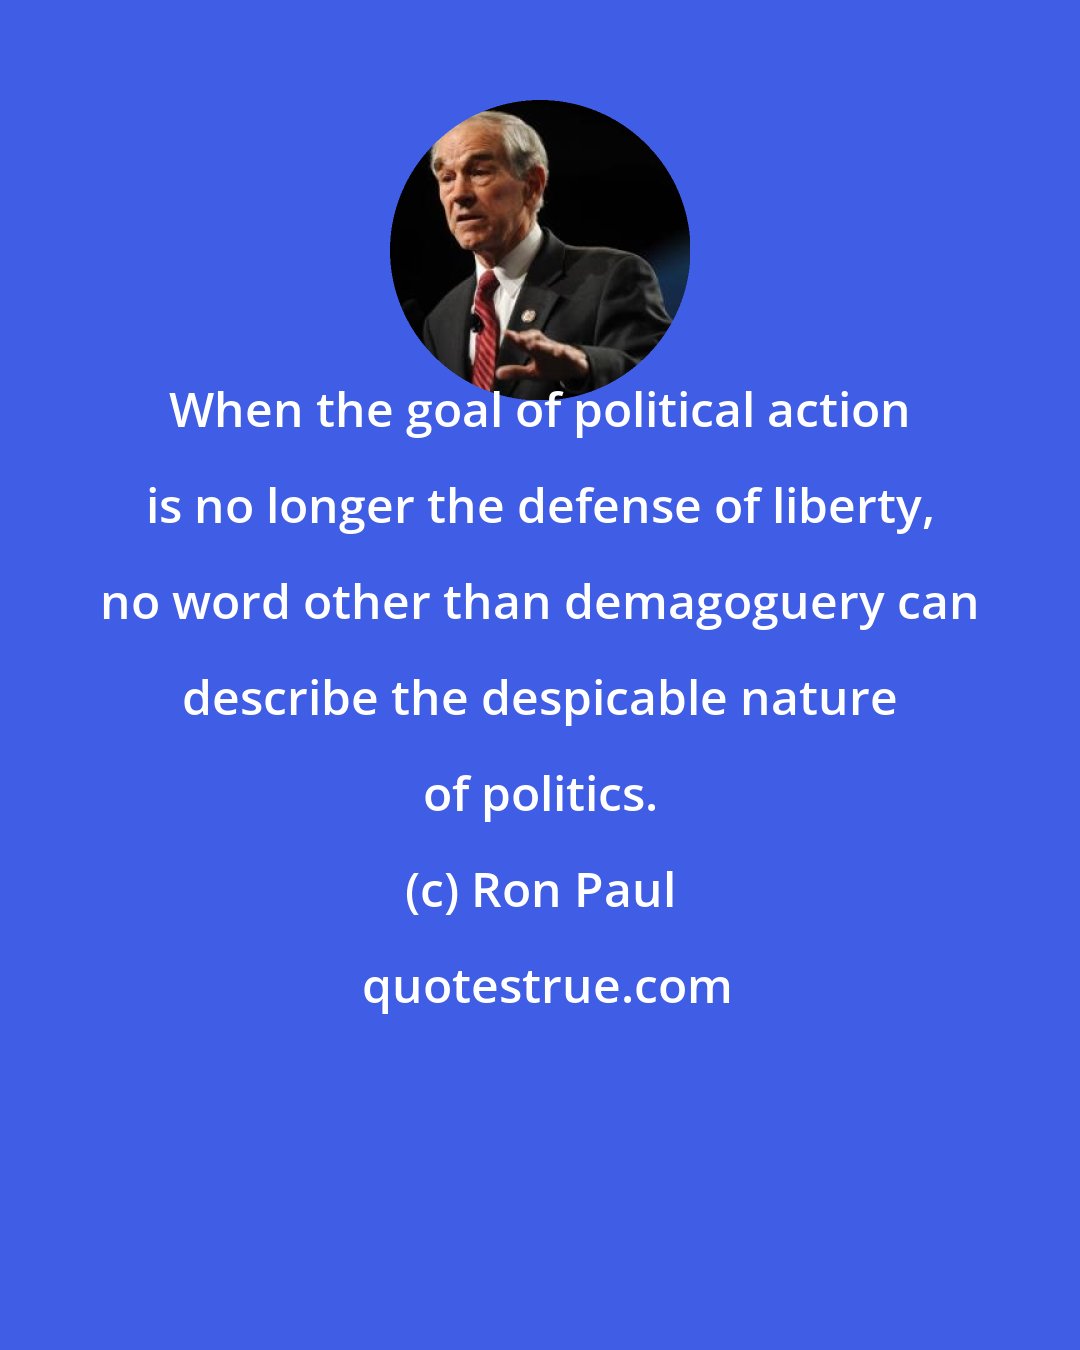 Ron Paul: When the goal of political action is no longer the defense of liberty, no word other than demagoguery can describe the despicable nature of politics.